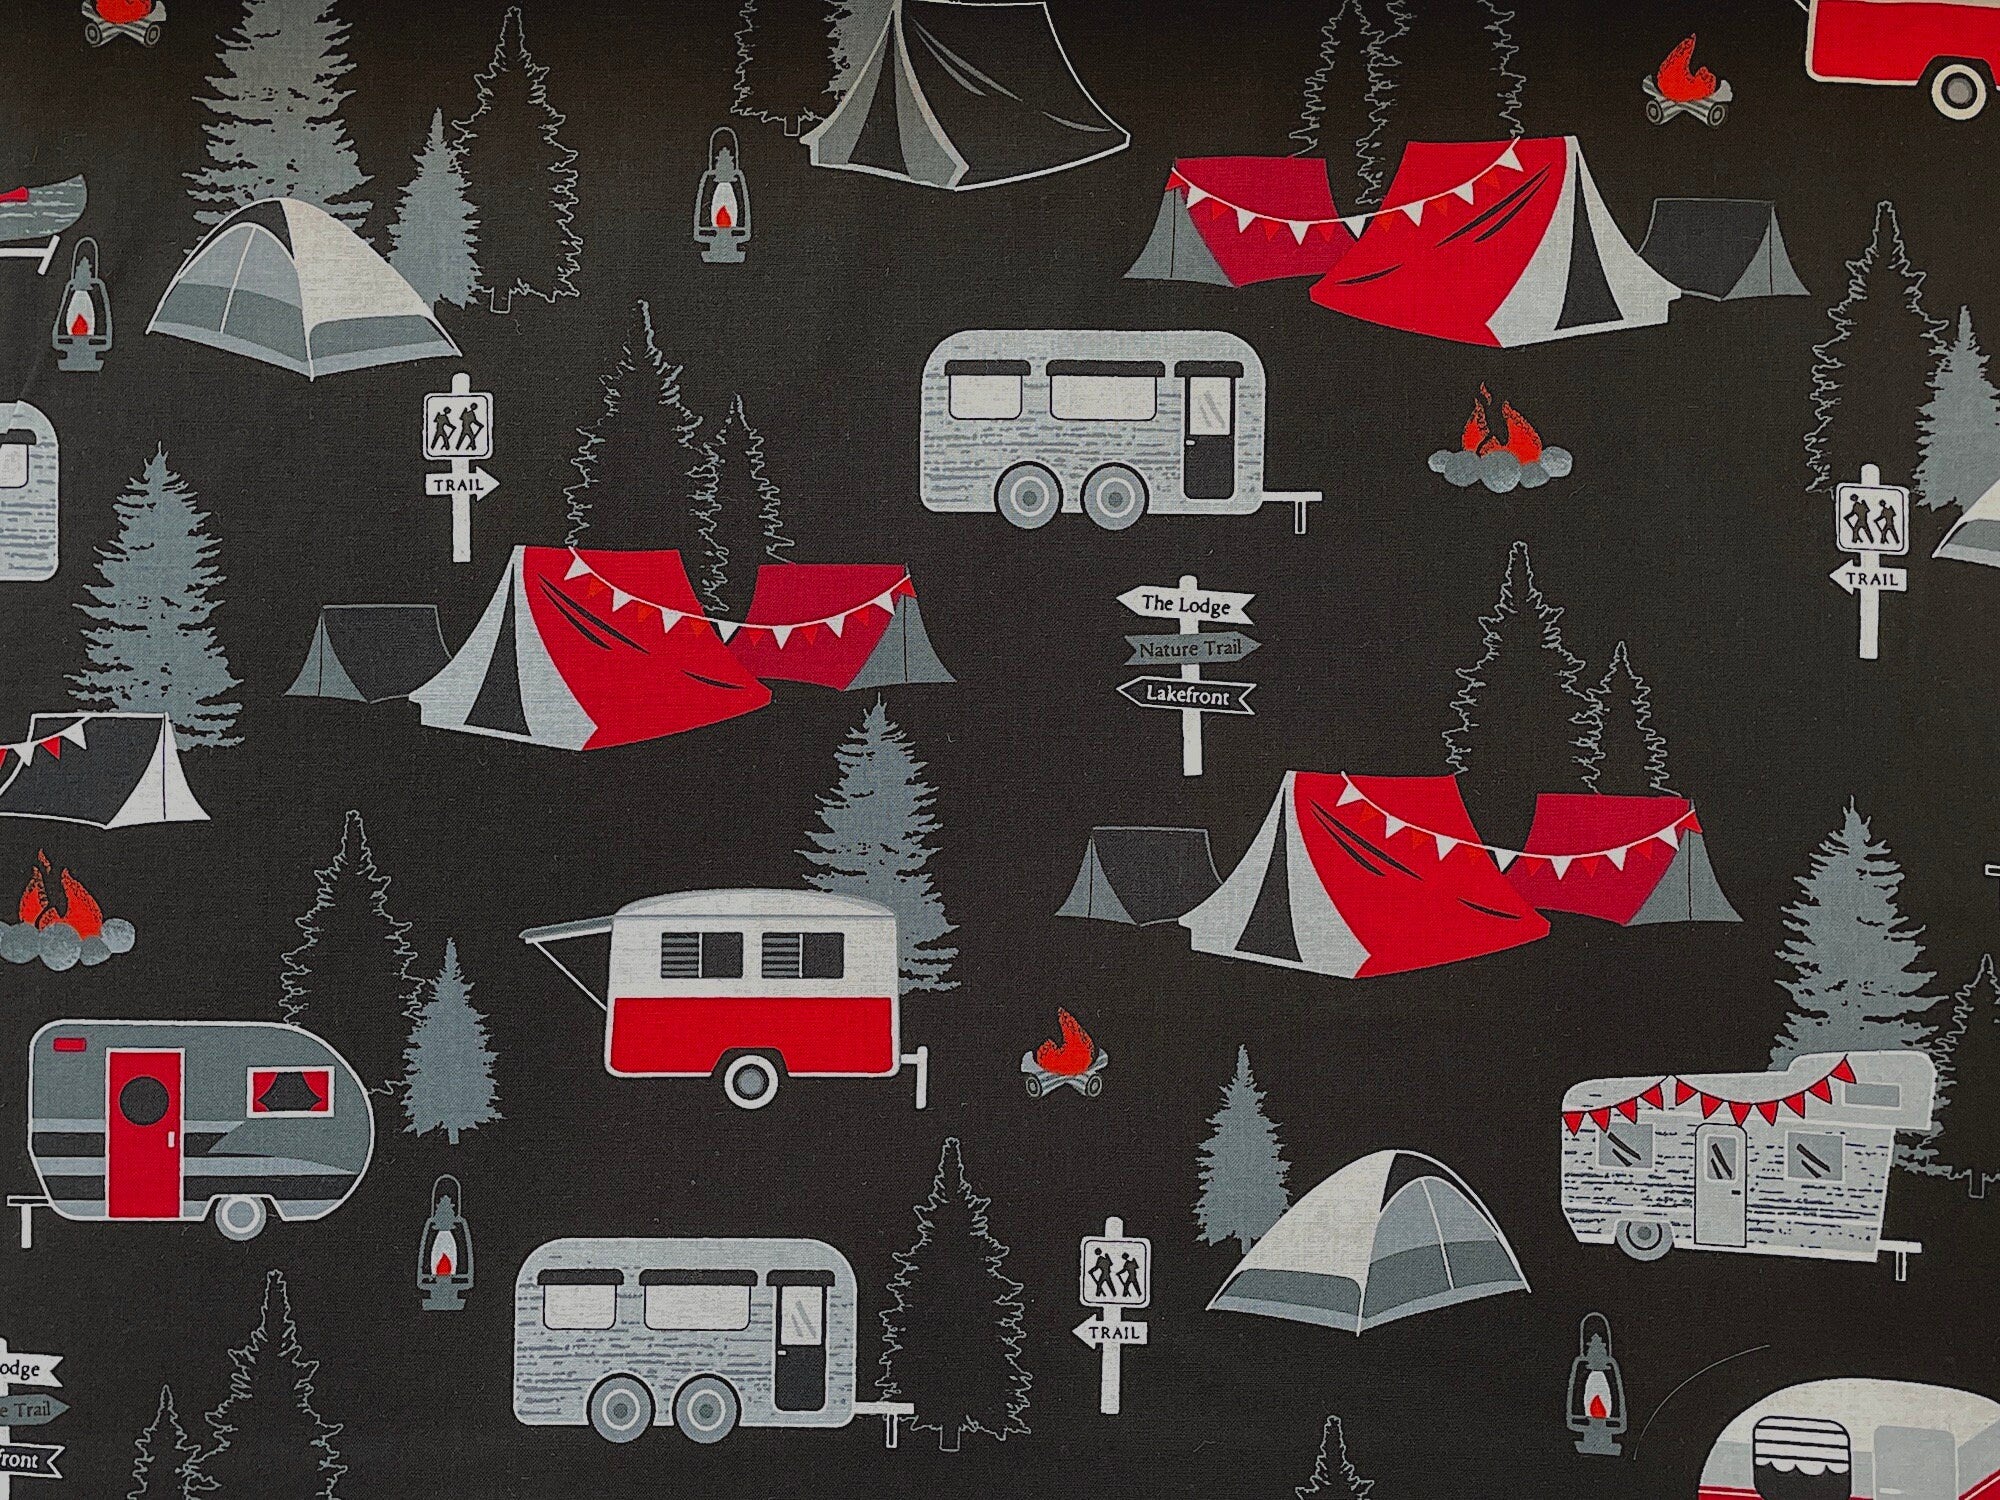 This fabric is called Gone Camping and is part of the Great Outdoors collection by Kanvas Studio. This black, fabric is covered with travel trailers, tents, campfires and trees. Directional signs say trail, the lodge, nature trail and lakefront. 